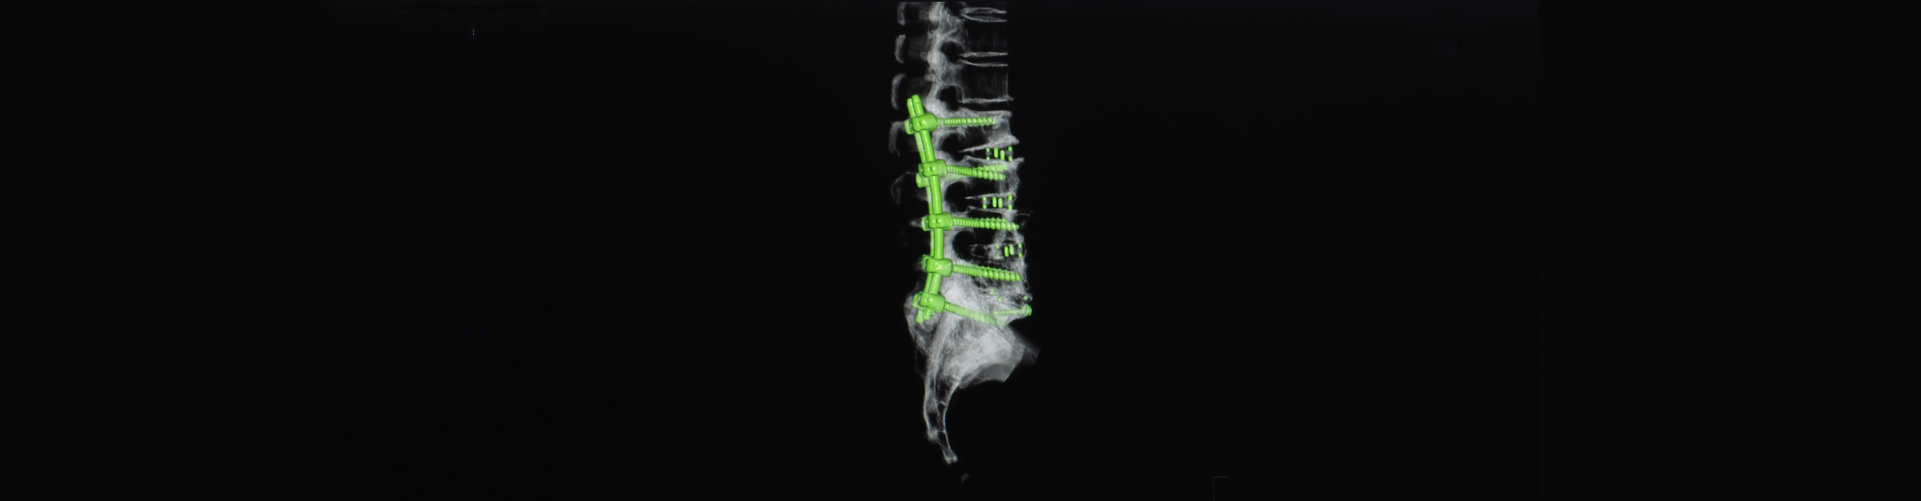 Computer tomography or CT scan image of spine showing pedicle screw fixation